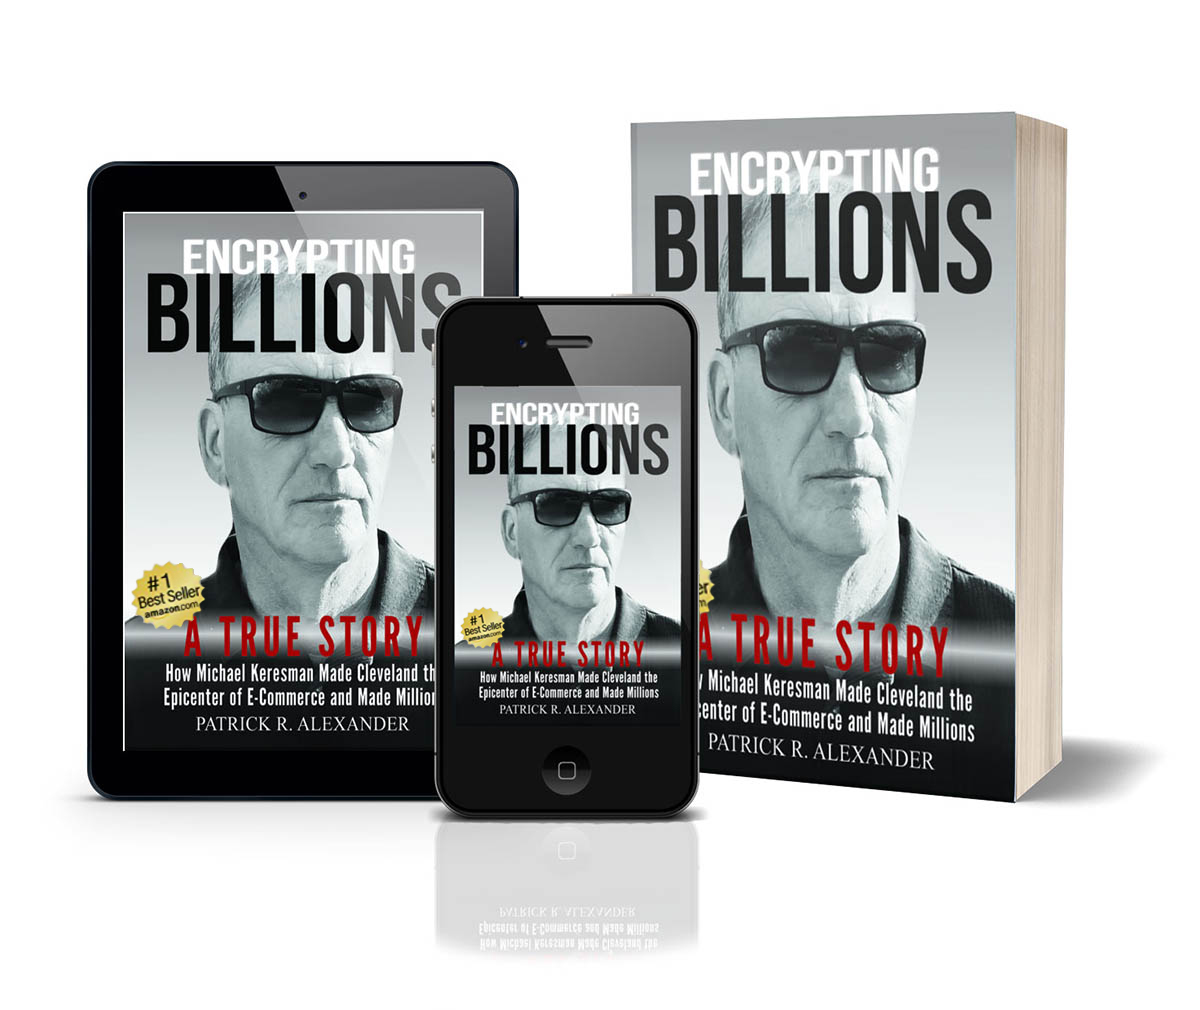 Encrypting Billions book on paperback, iphone, and tablet